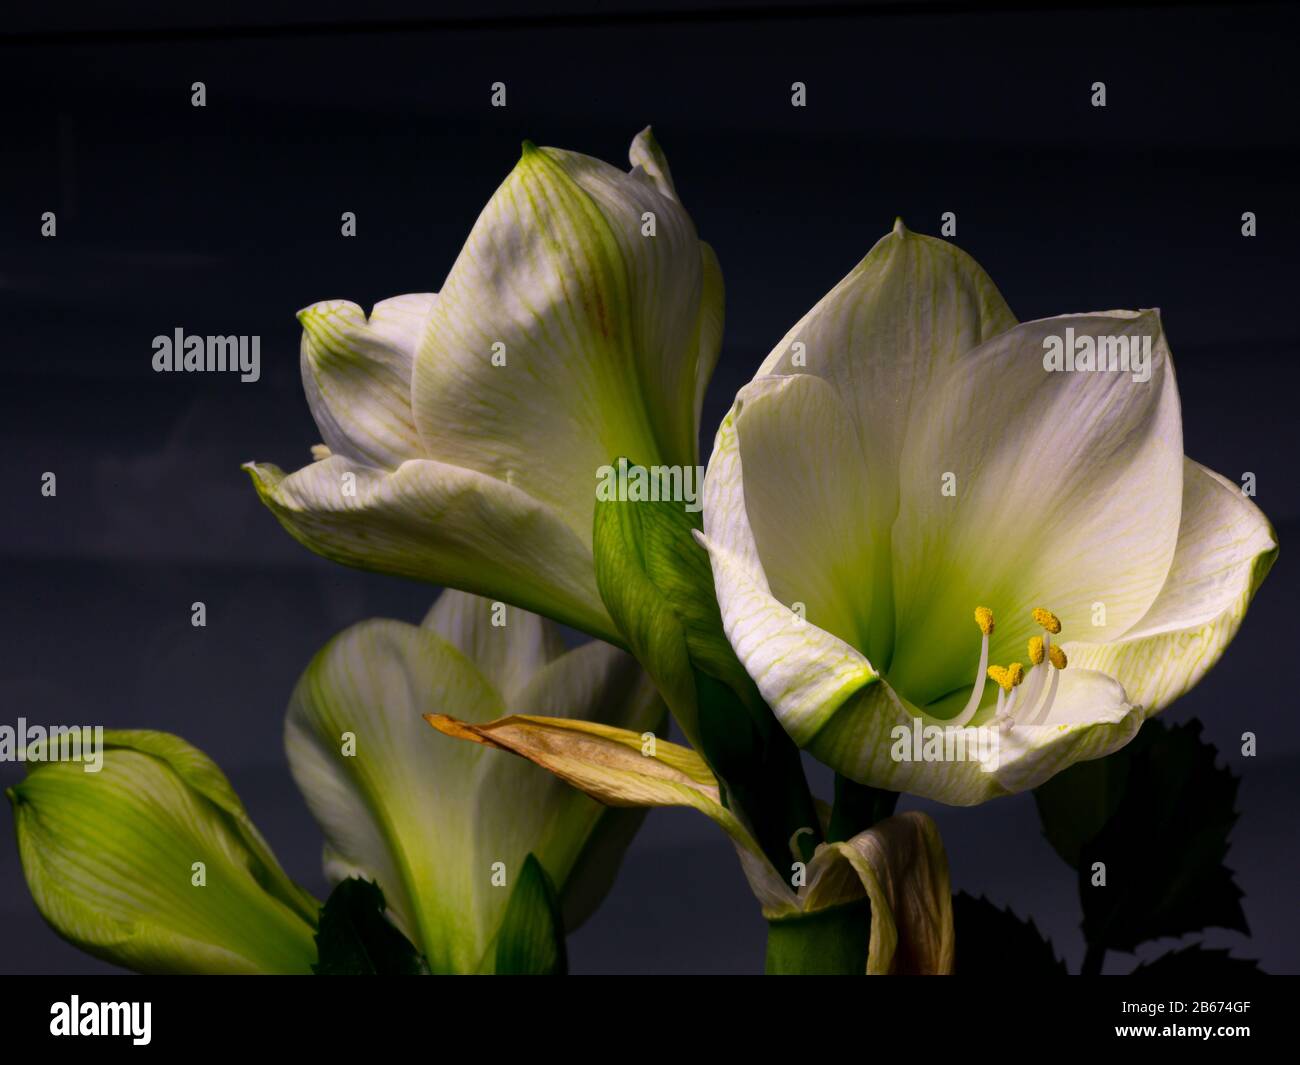 White Amaryllis flower in full bloom in front of a dark background Stock Photo